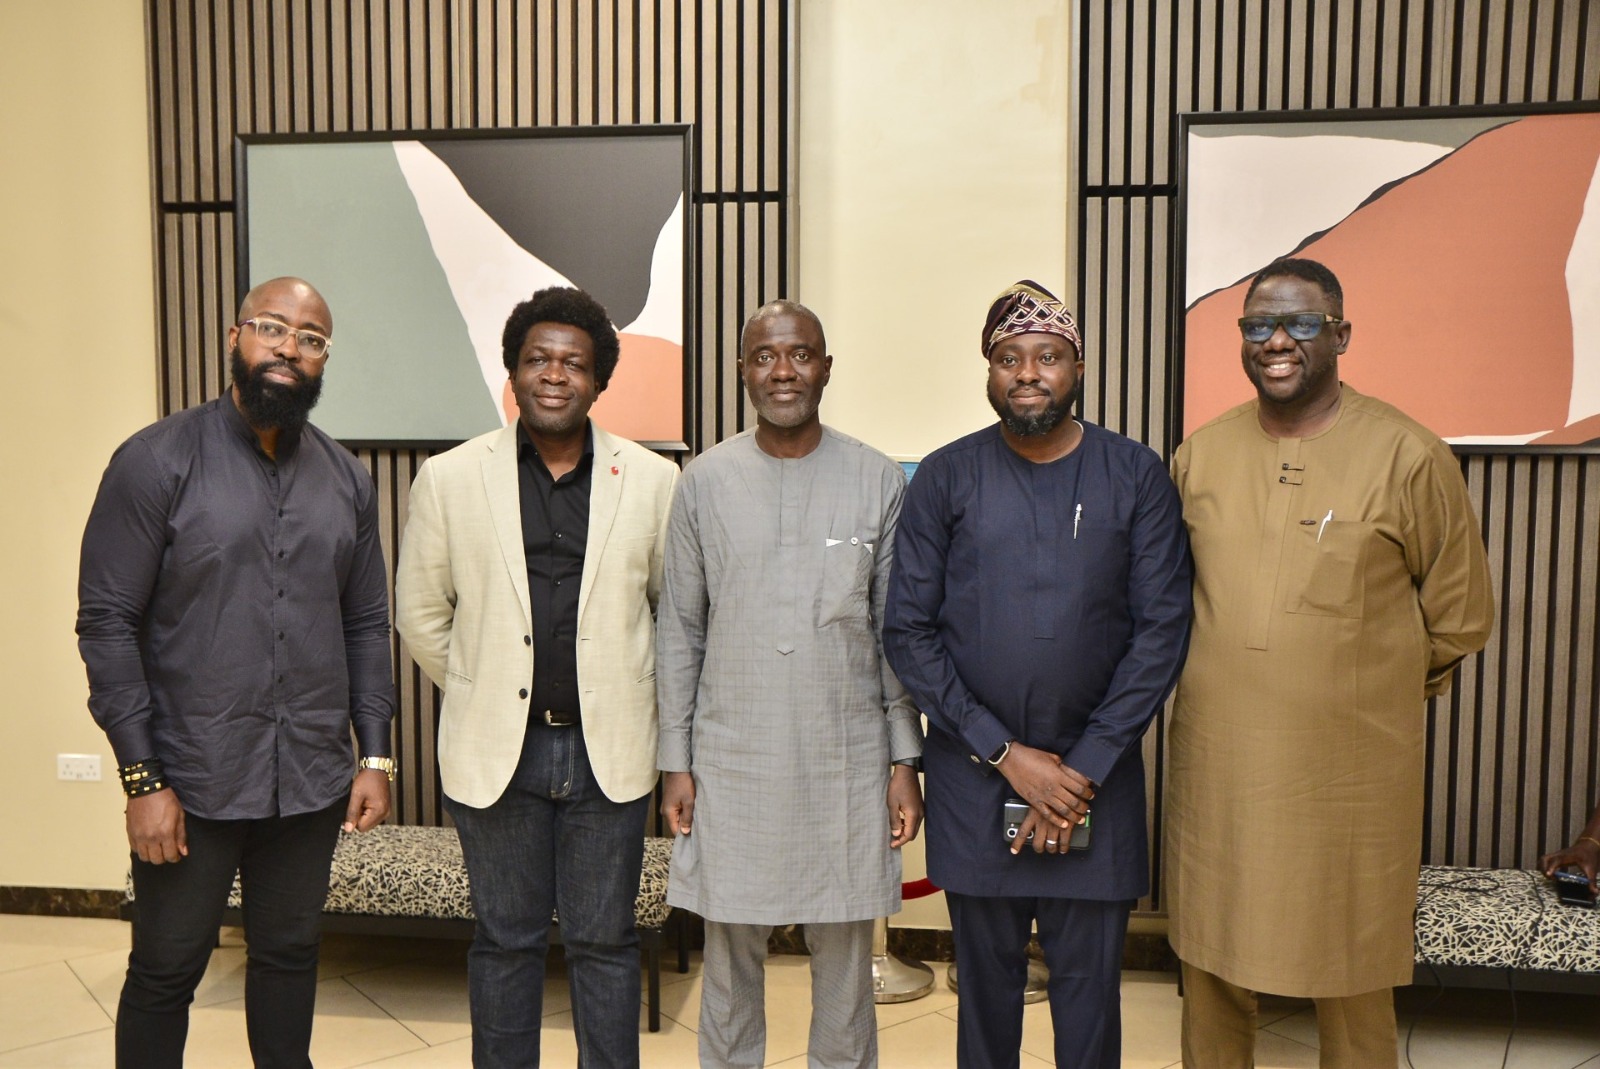 From Left to right: Mr. Tunji Andrews, Mr. Olayinka Oni, Chief Technology Officer, Sterling Bank Limited; Mr. Aminu Maiga, Executive Director, Nigeria Inter-Bank Settlement System Plc; Mr. Mayowa Owolabi, Uniswitch and Mr. Dotun Oyekunle, Senior Vice President, Flutterwave at Sterling Thought Leadership Series on the State of FI Consumer Security held in Lagos recently.